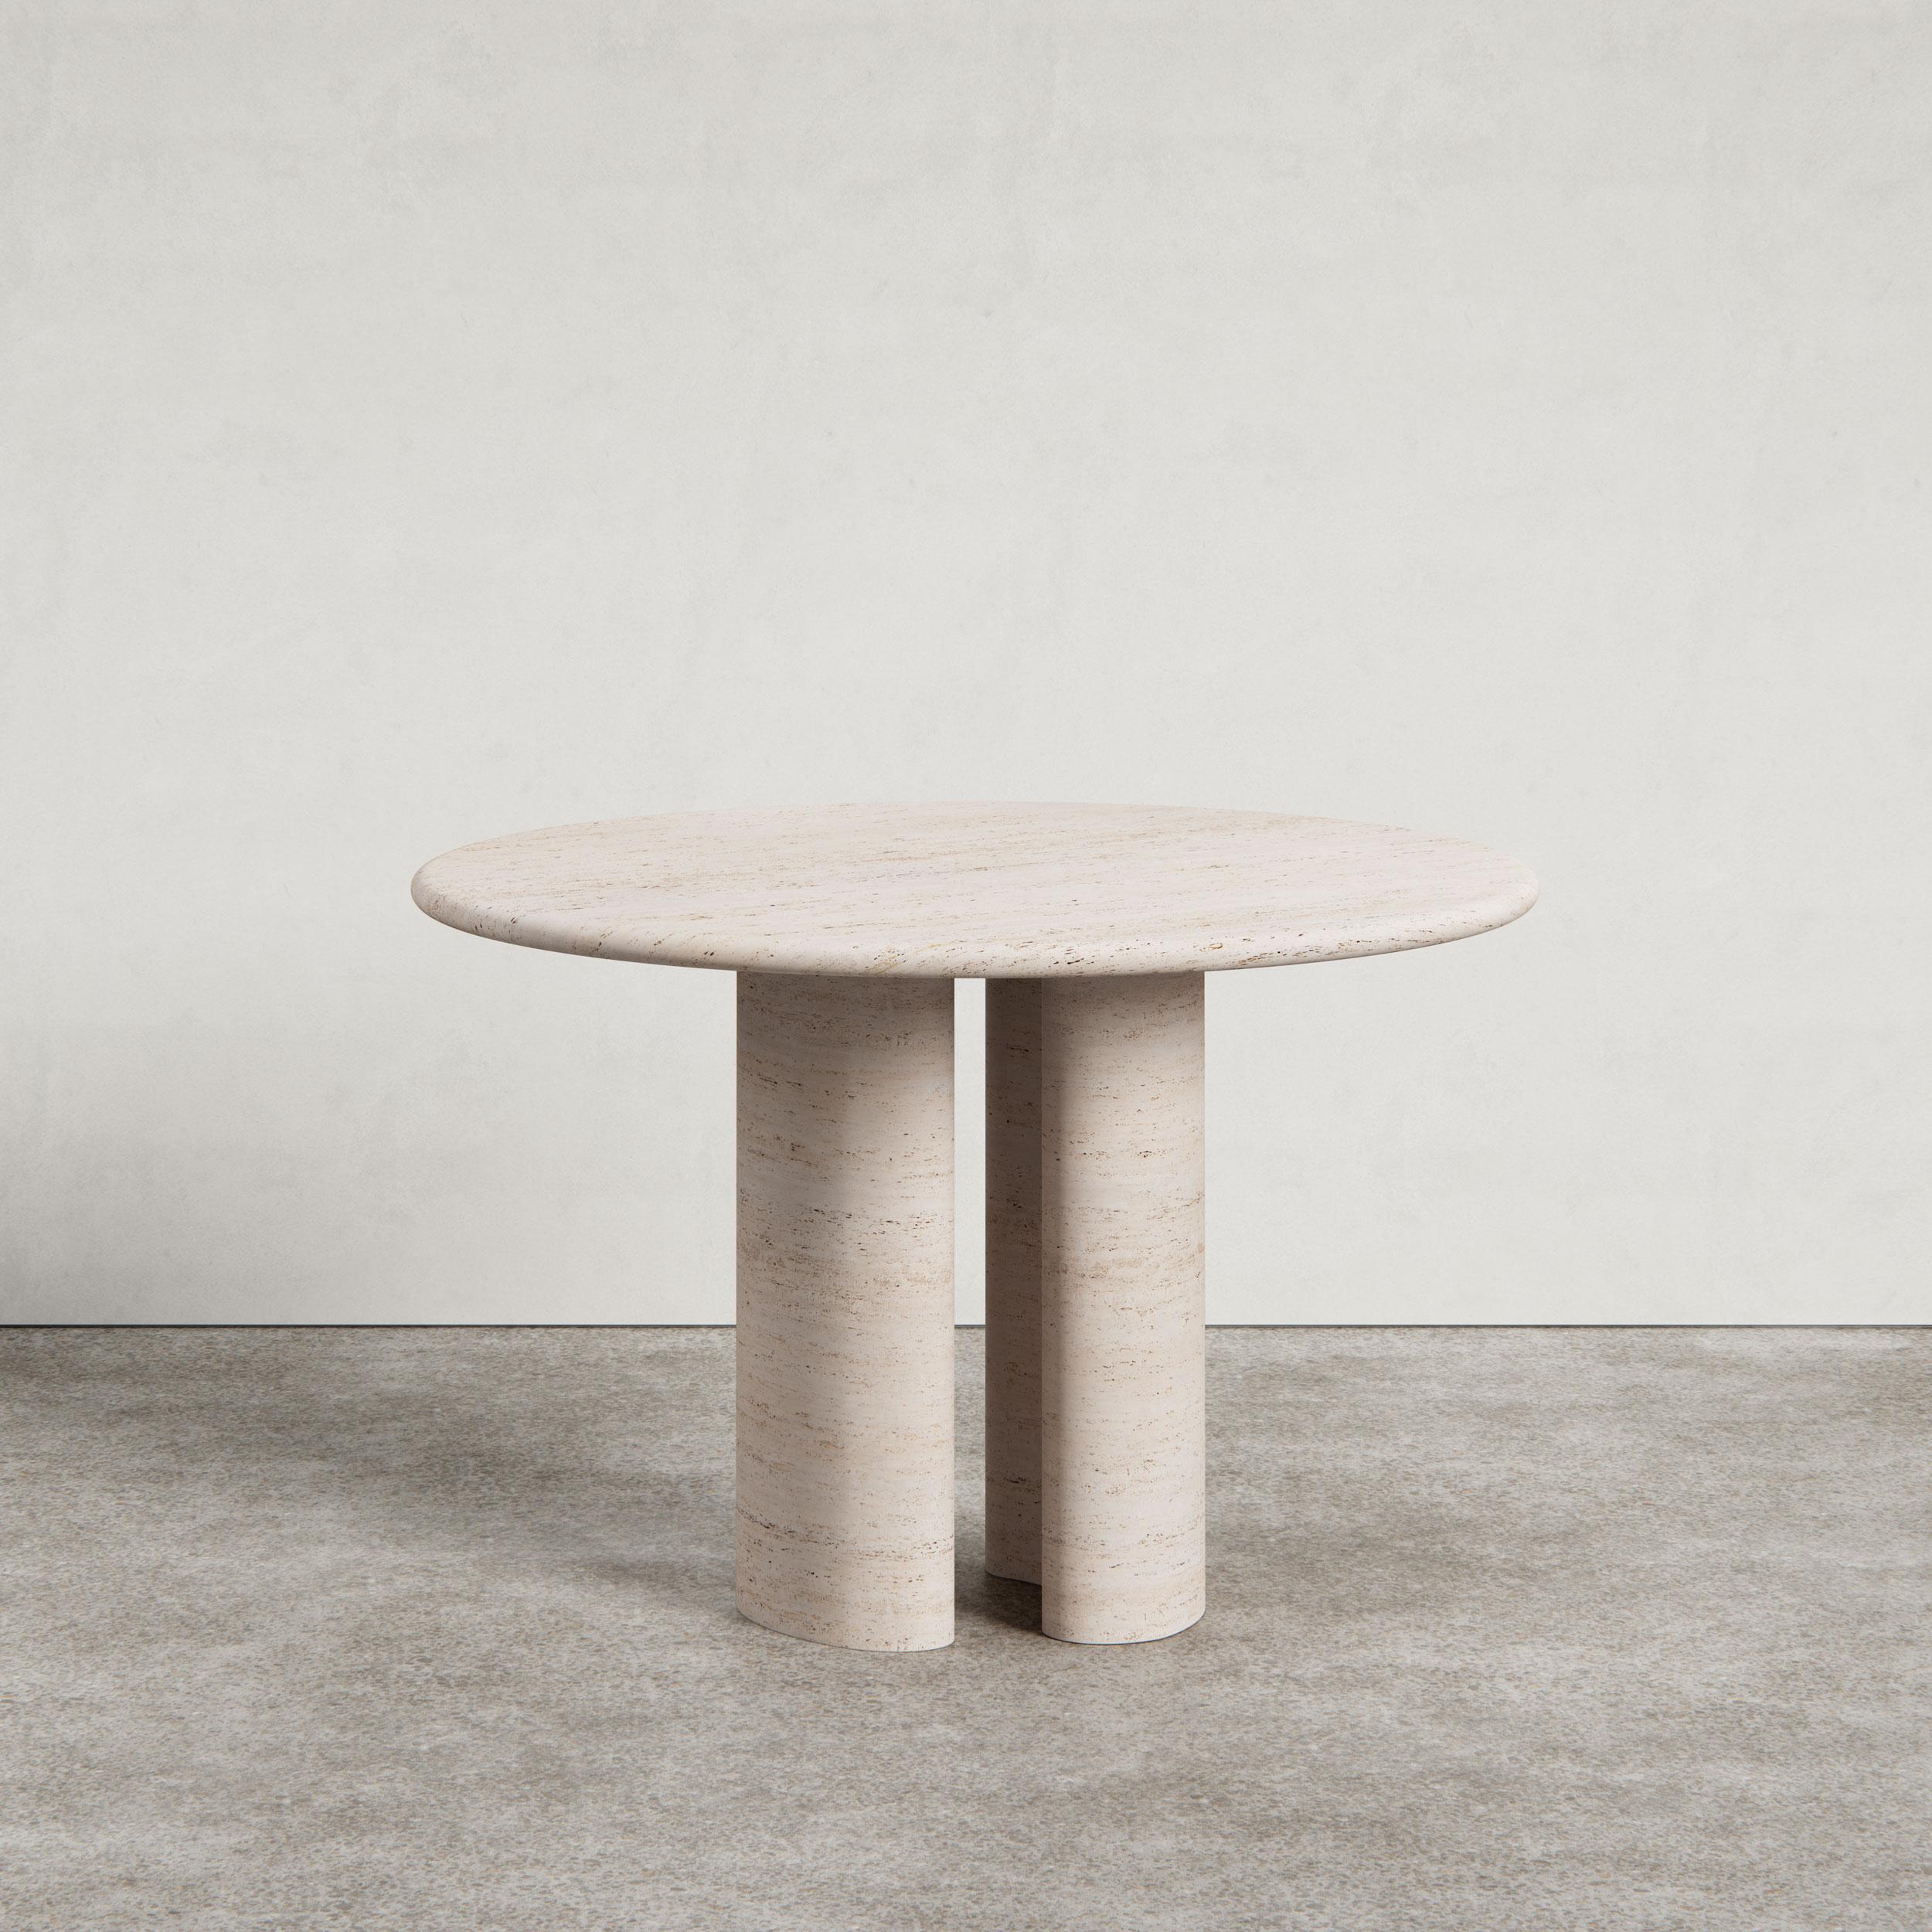 Introducing the Pietra Dining or feature table; a new addition to the Pietra collection.

Designed by Just Adele. This design is carved from a block of Italian natural stone to create organic curves and kidney-shaped legs. Available in Viola Monet,